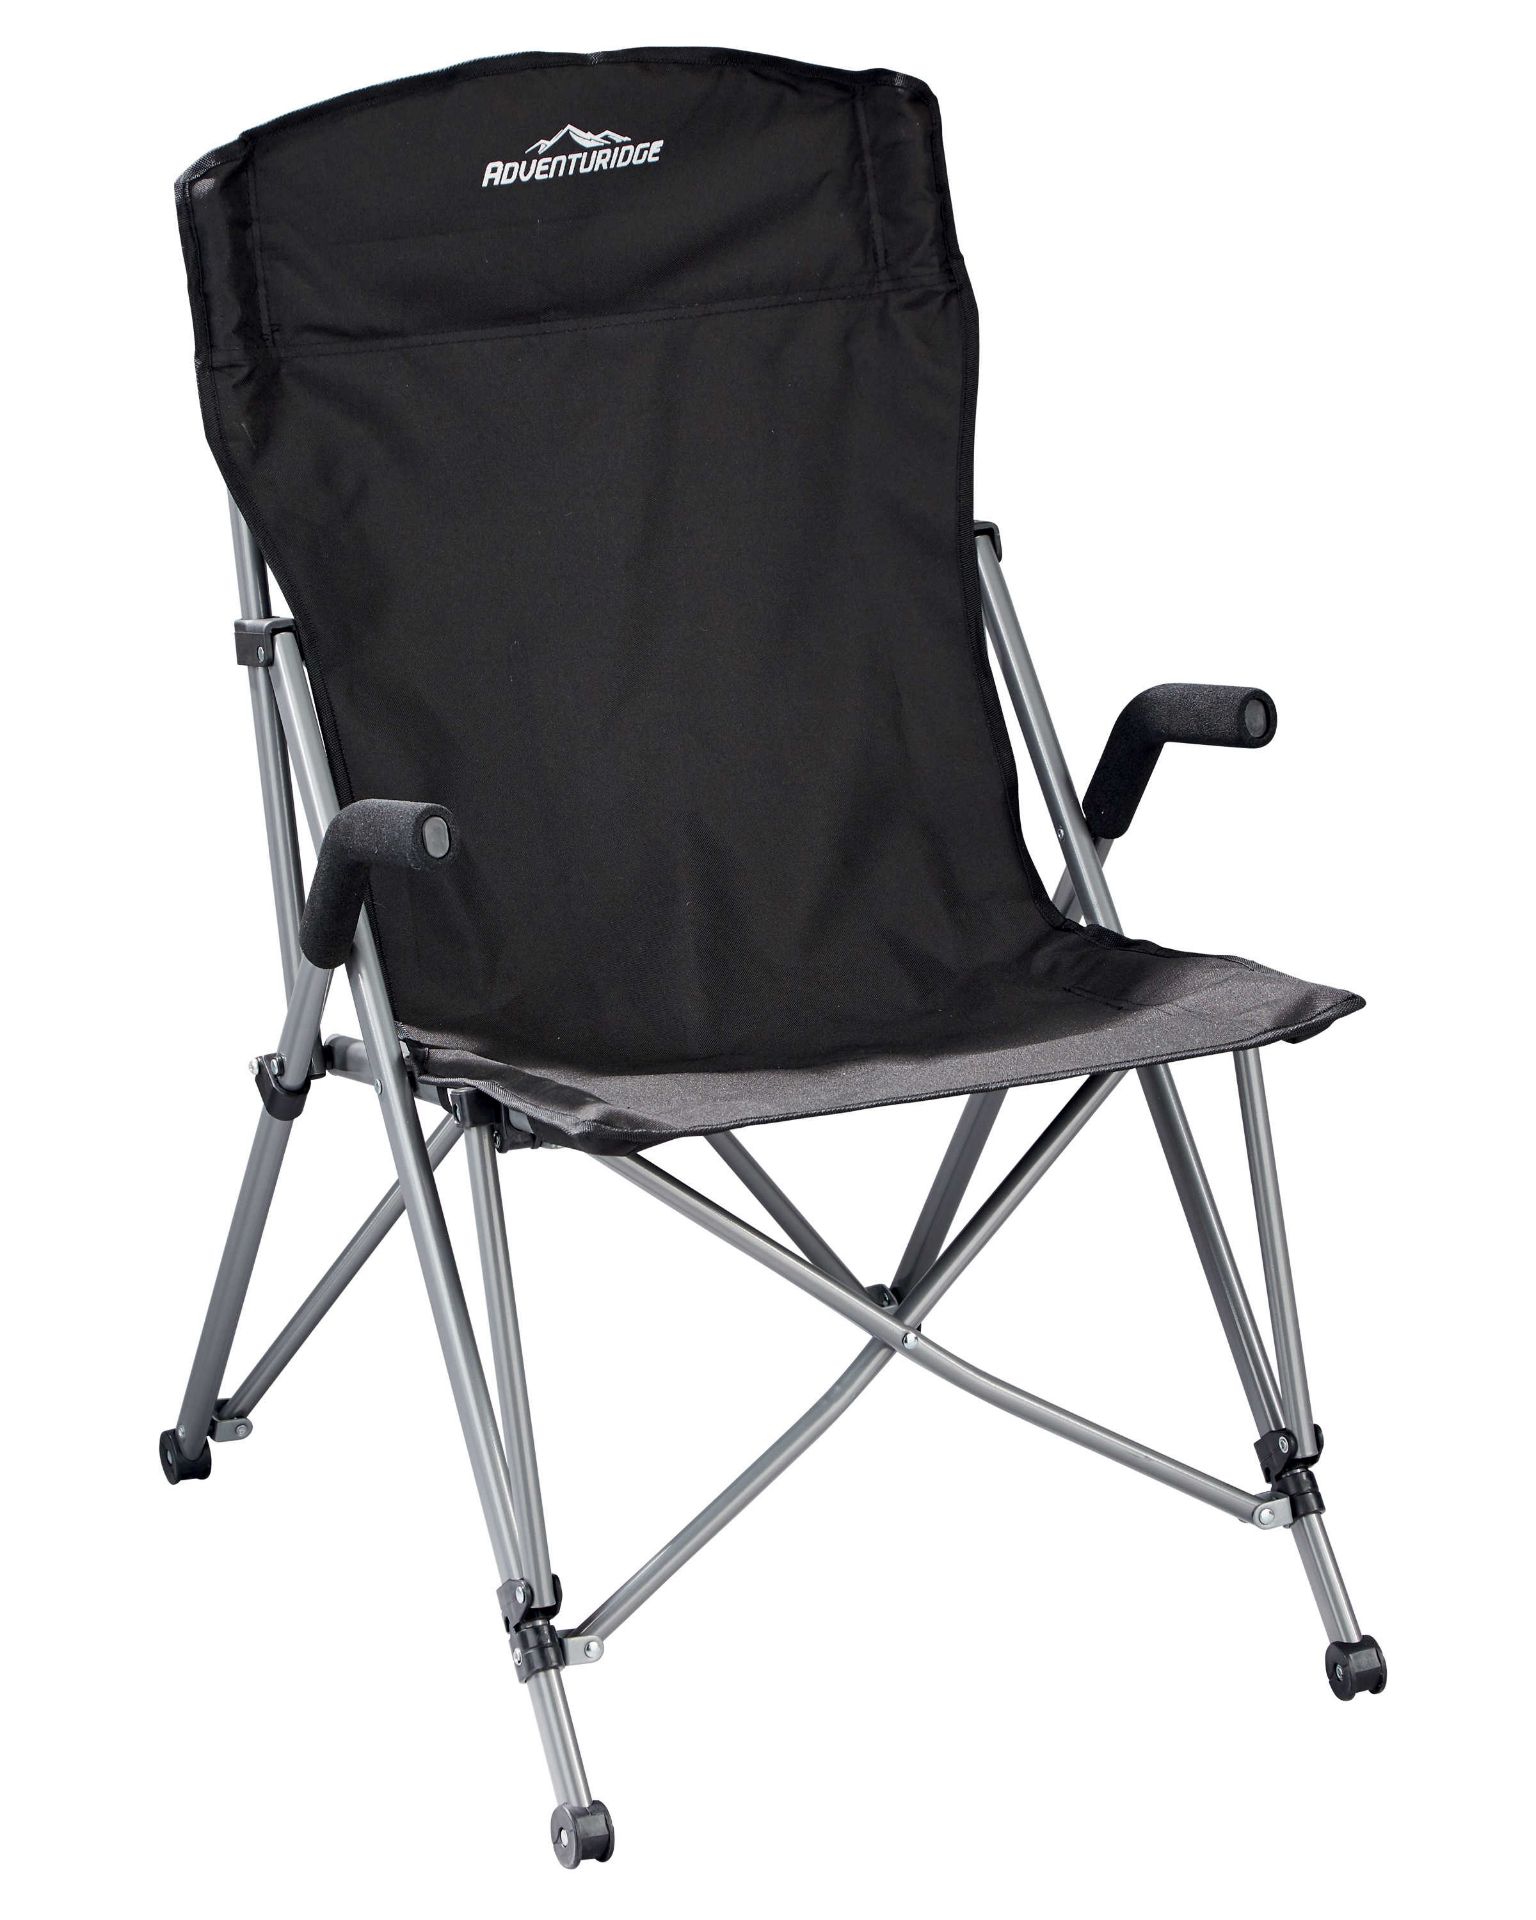 V *TRADE QTY* Brand New Expedition/Tourer Chair In Silver/Black With Carry Case - Lightweight